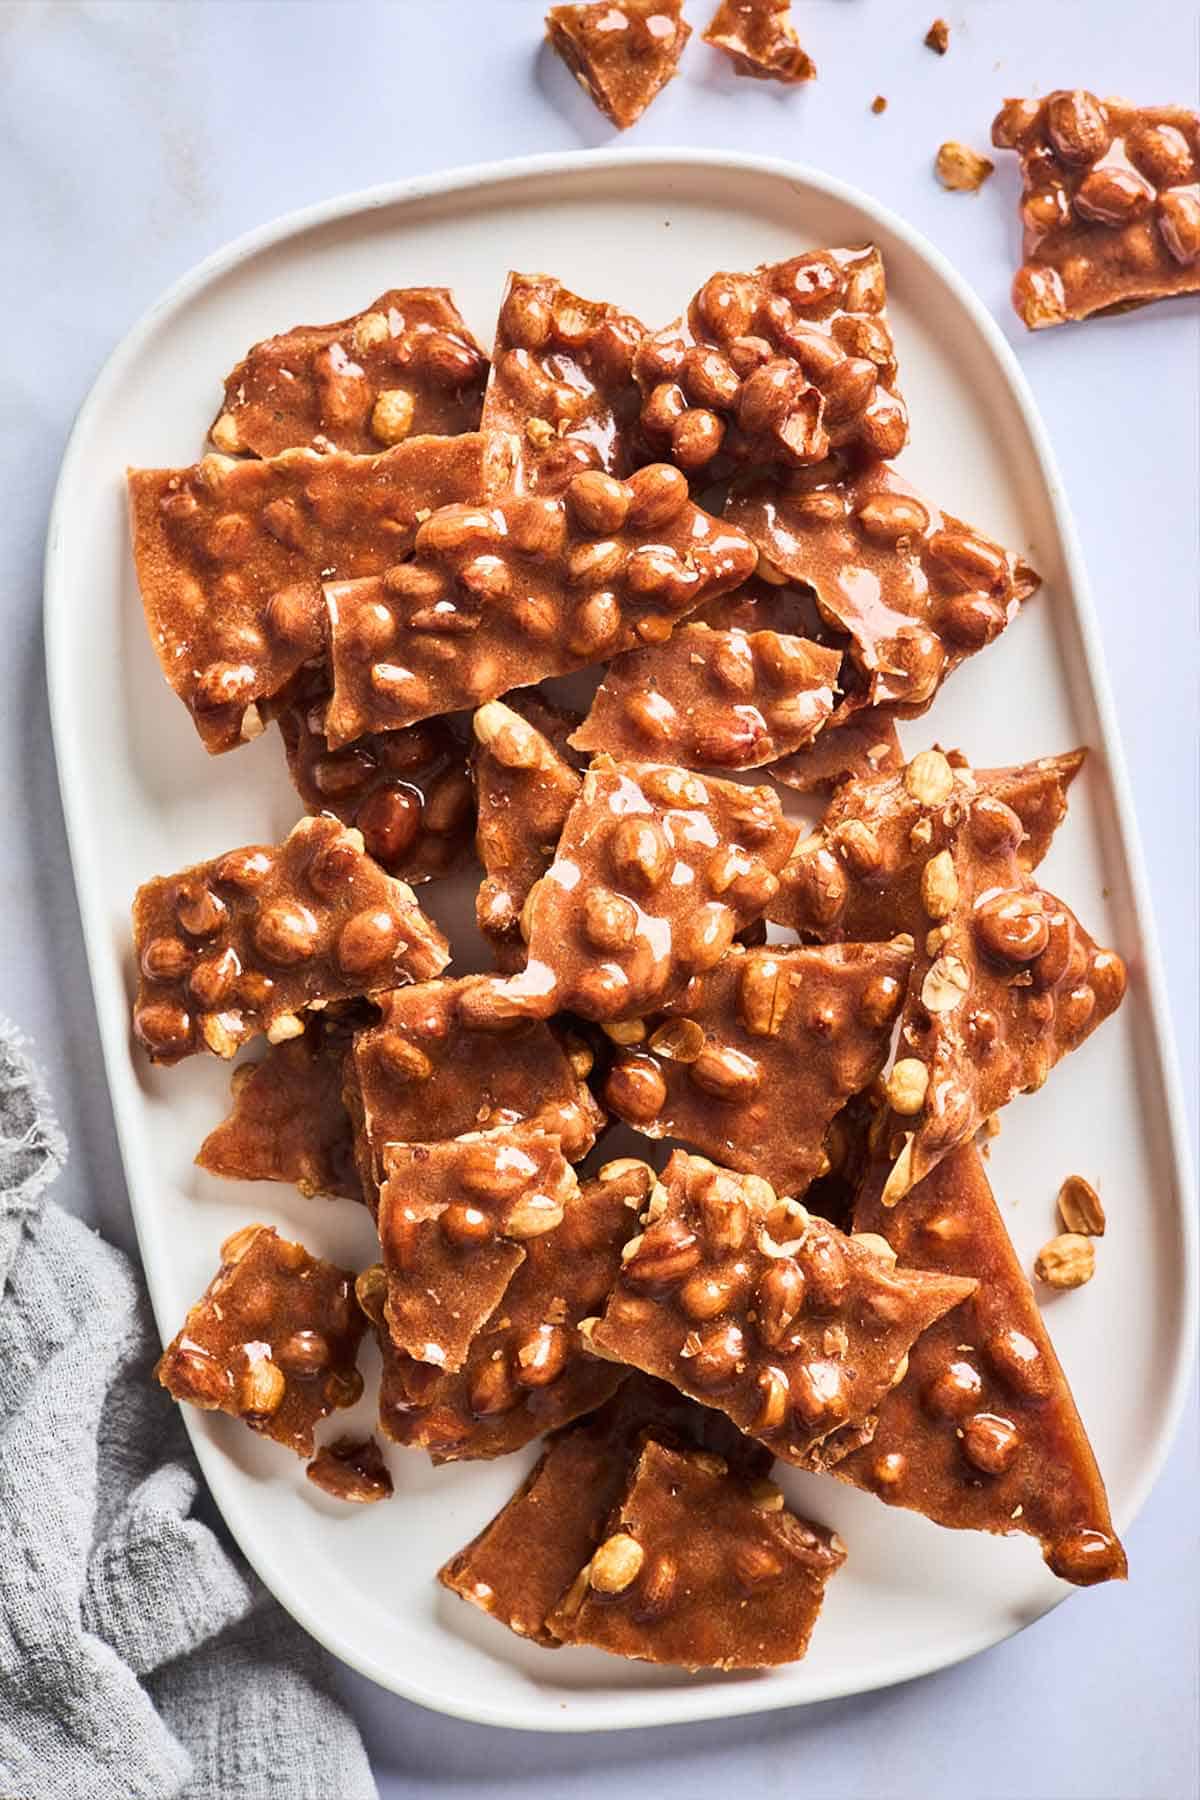 An oval white serving tray loaded up with peanut brittle with a few pieces scattered on the table next to it.